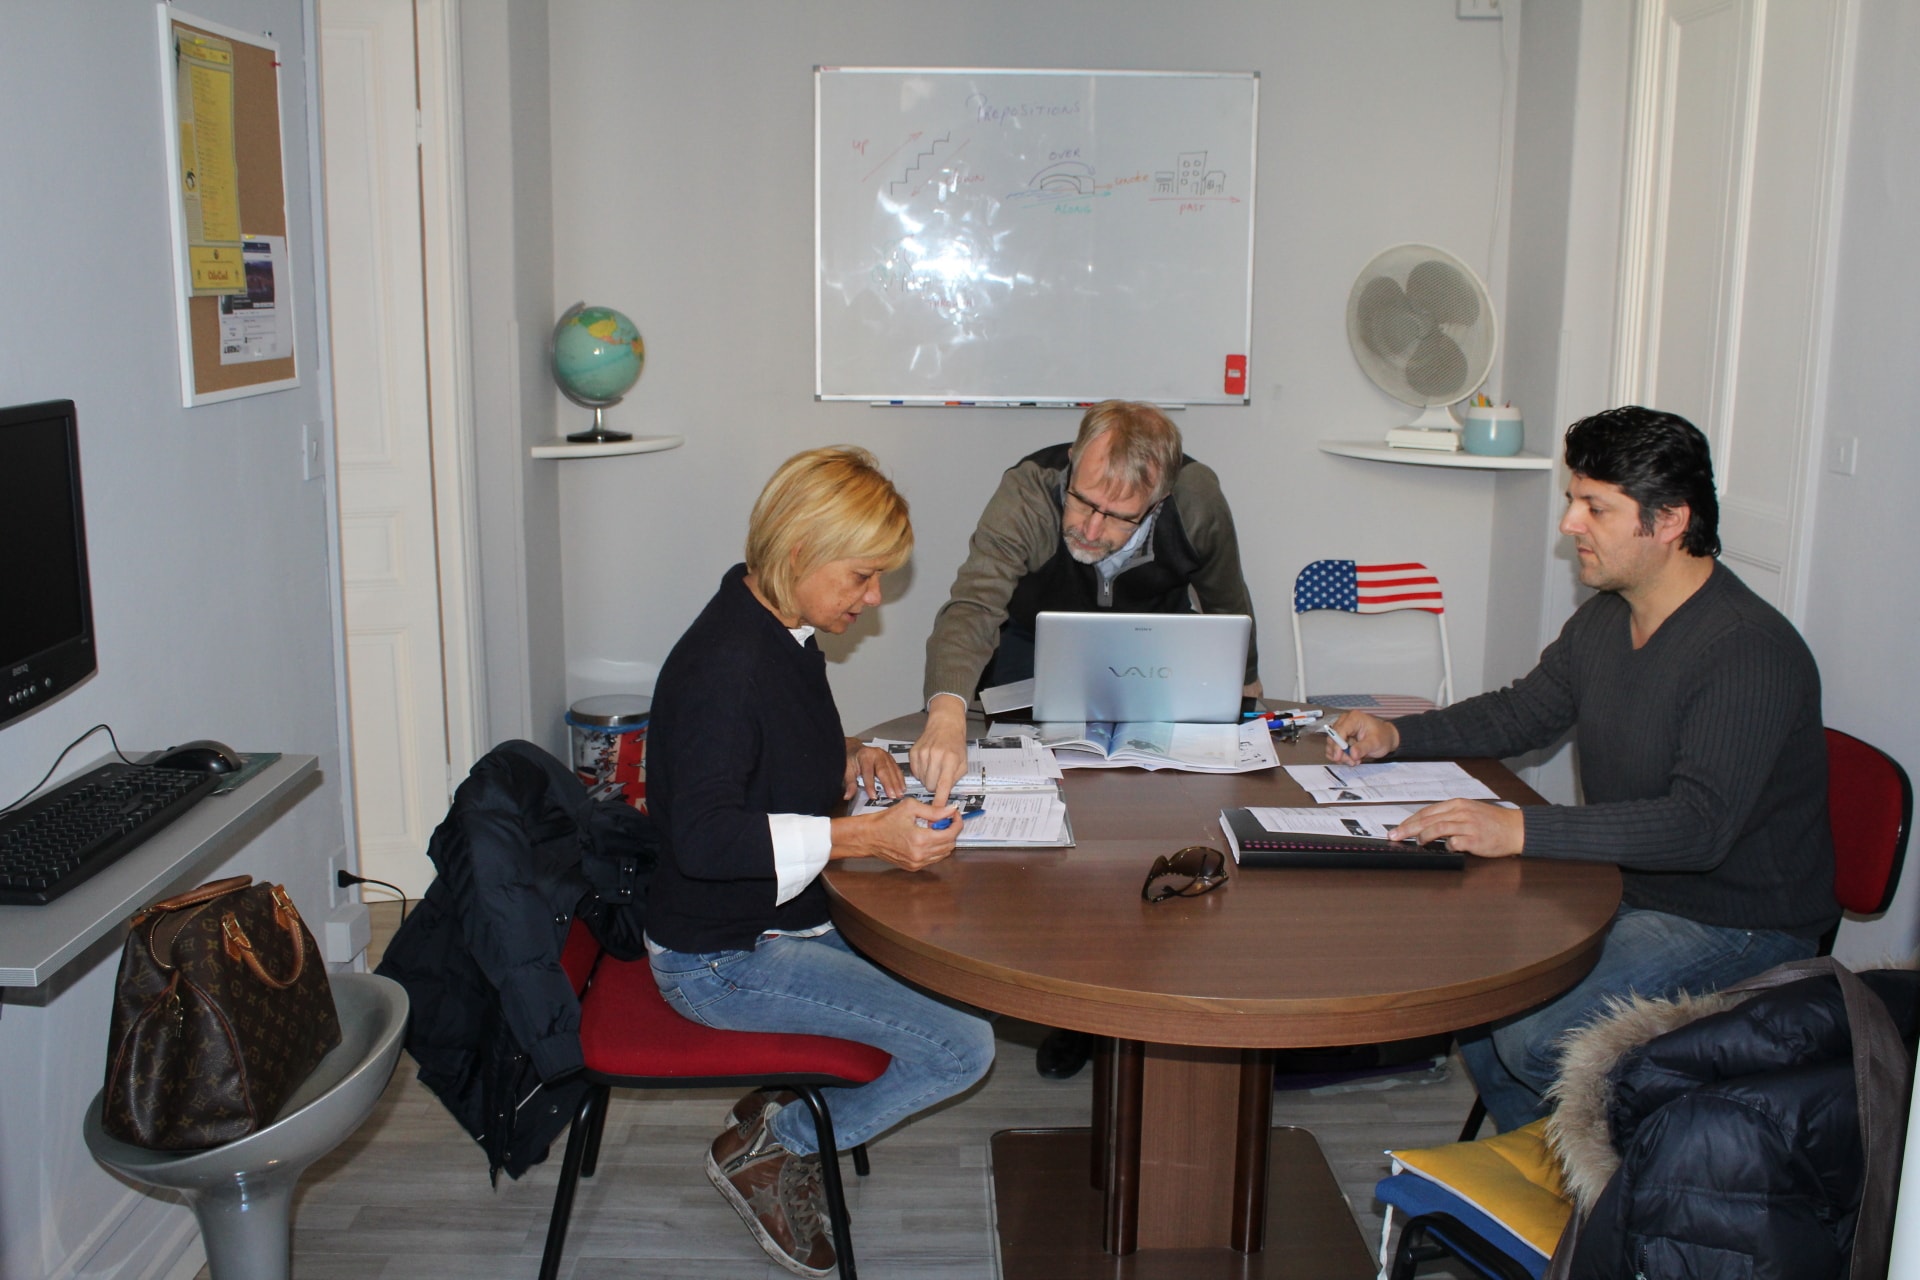 Omnilingua Sanremo Offers Foreign Language Courses For Public Institutions